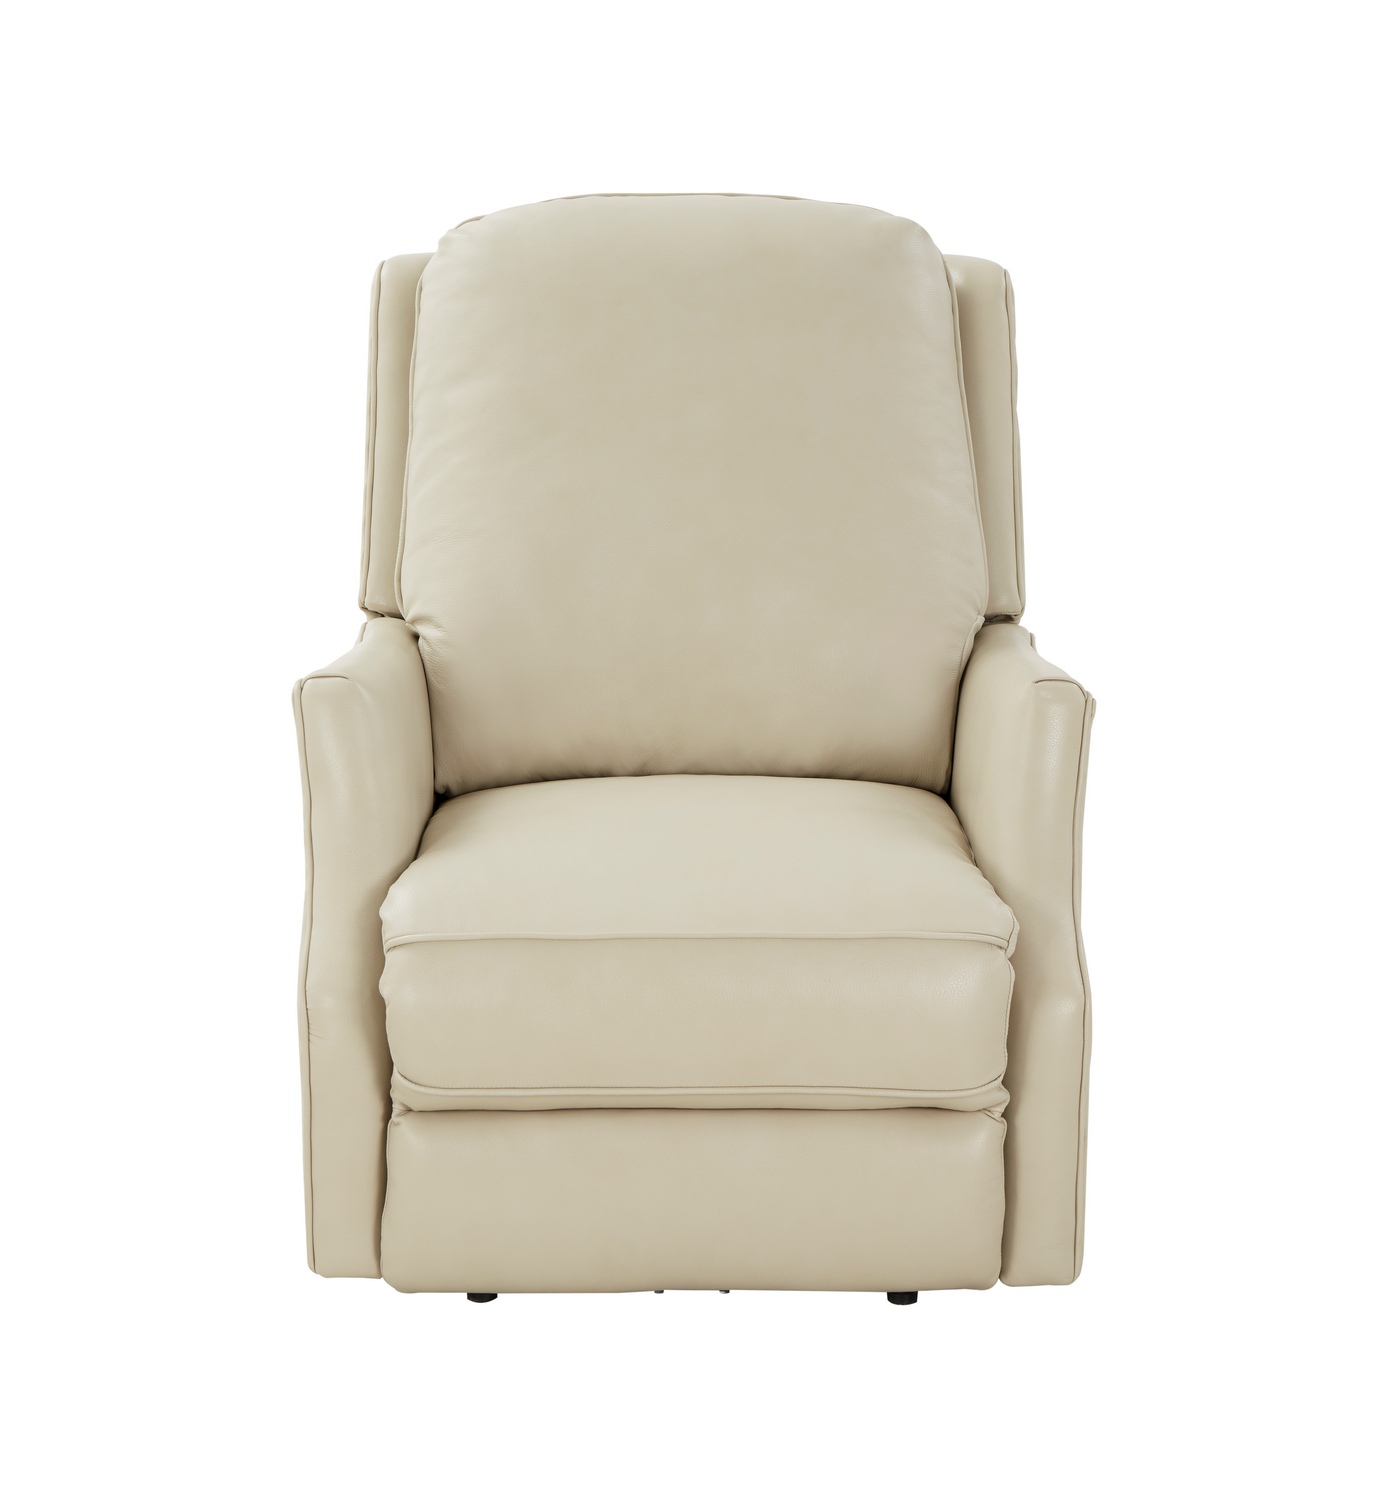 Barcalounger Springfield Power Recliner Chair - Barone Parchment/All Leather